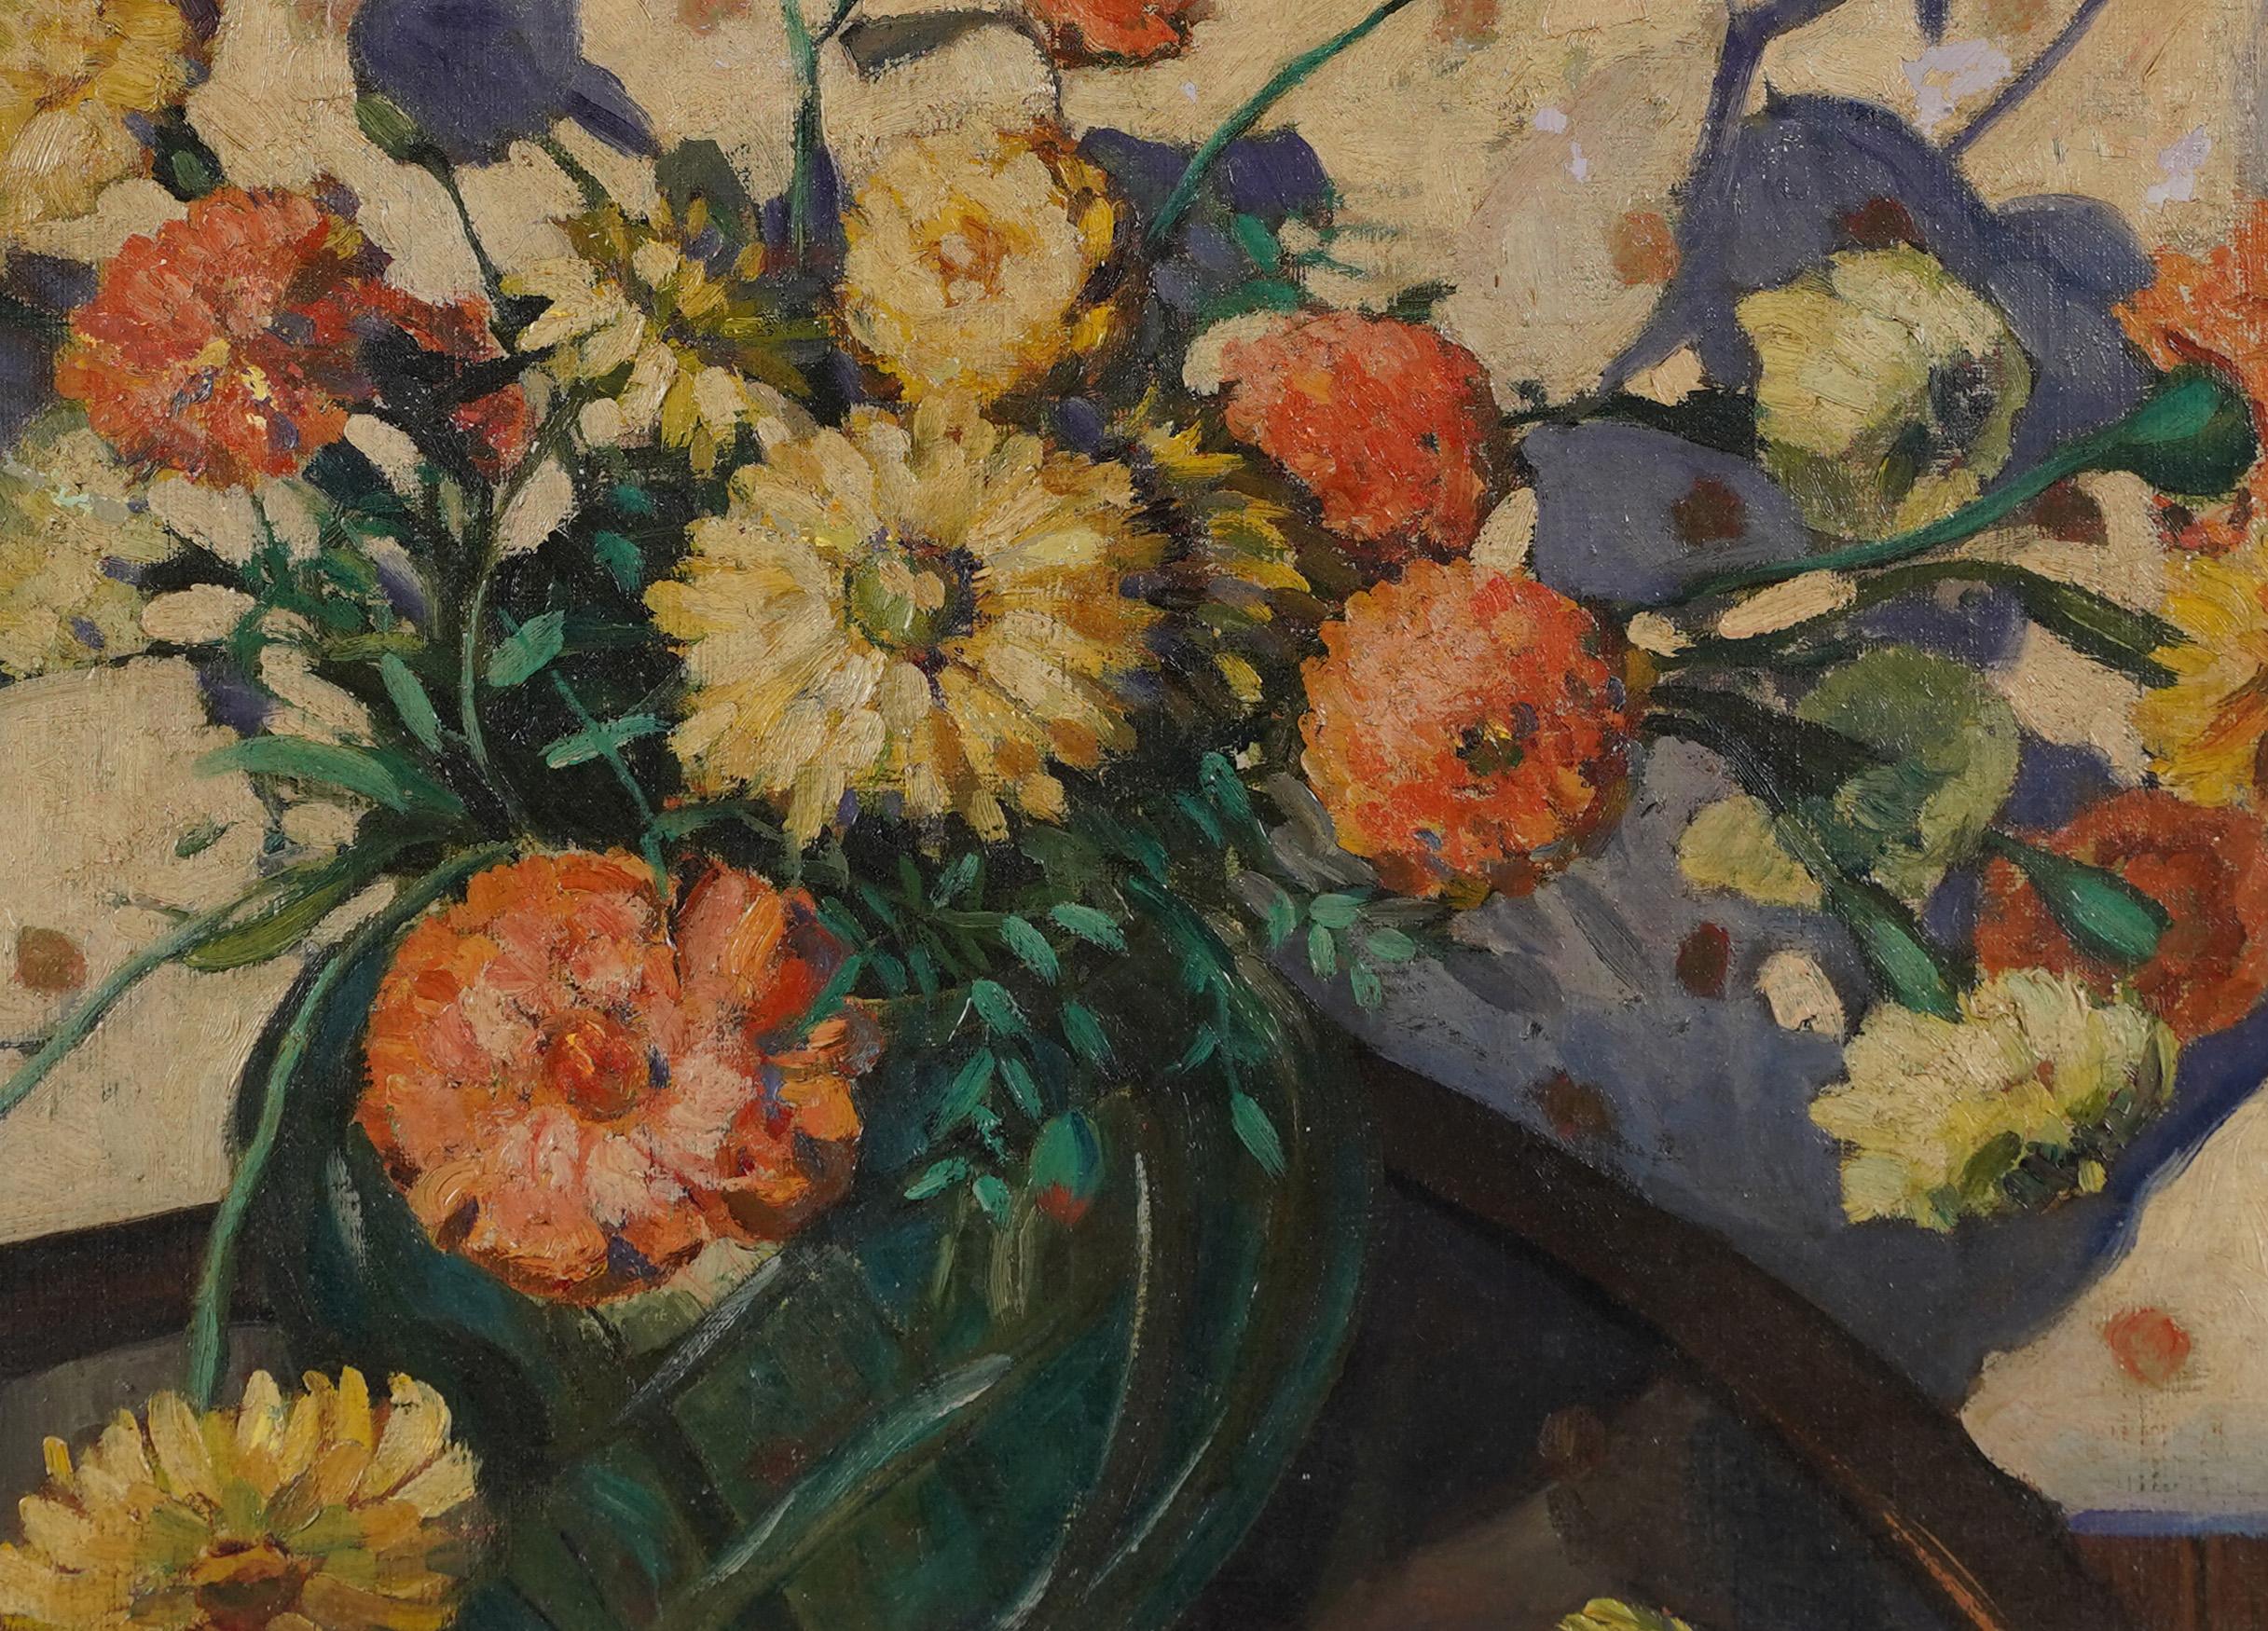 Antique American impressionist flower still life oil painting.  Oil on canvas, circa 1920.  Signé.  Image size 20L x 16H.  Housed in a period giltwood frame.